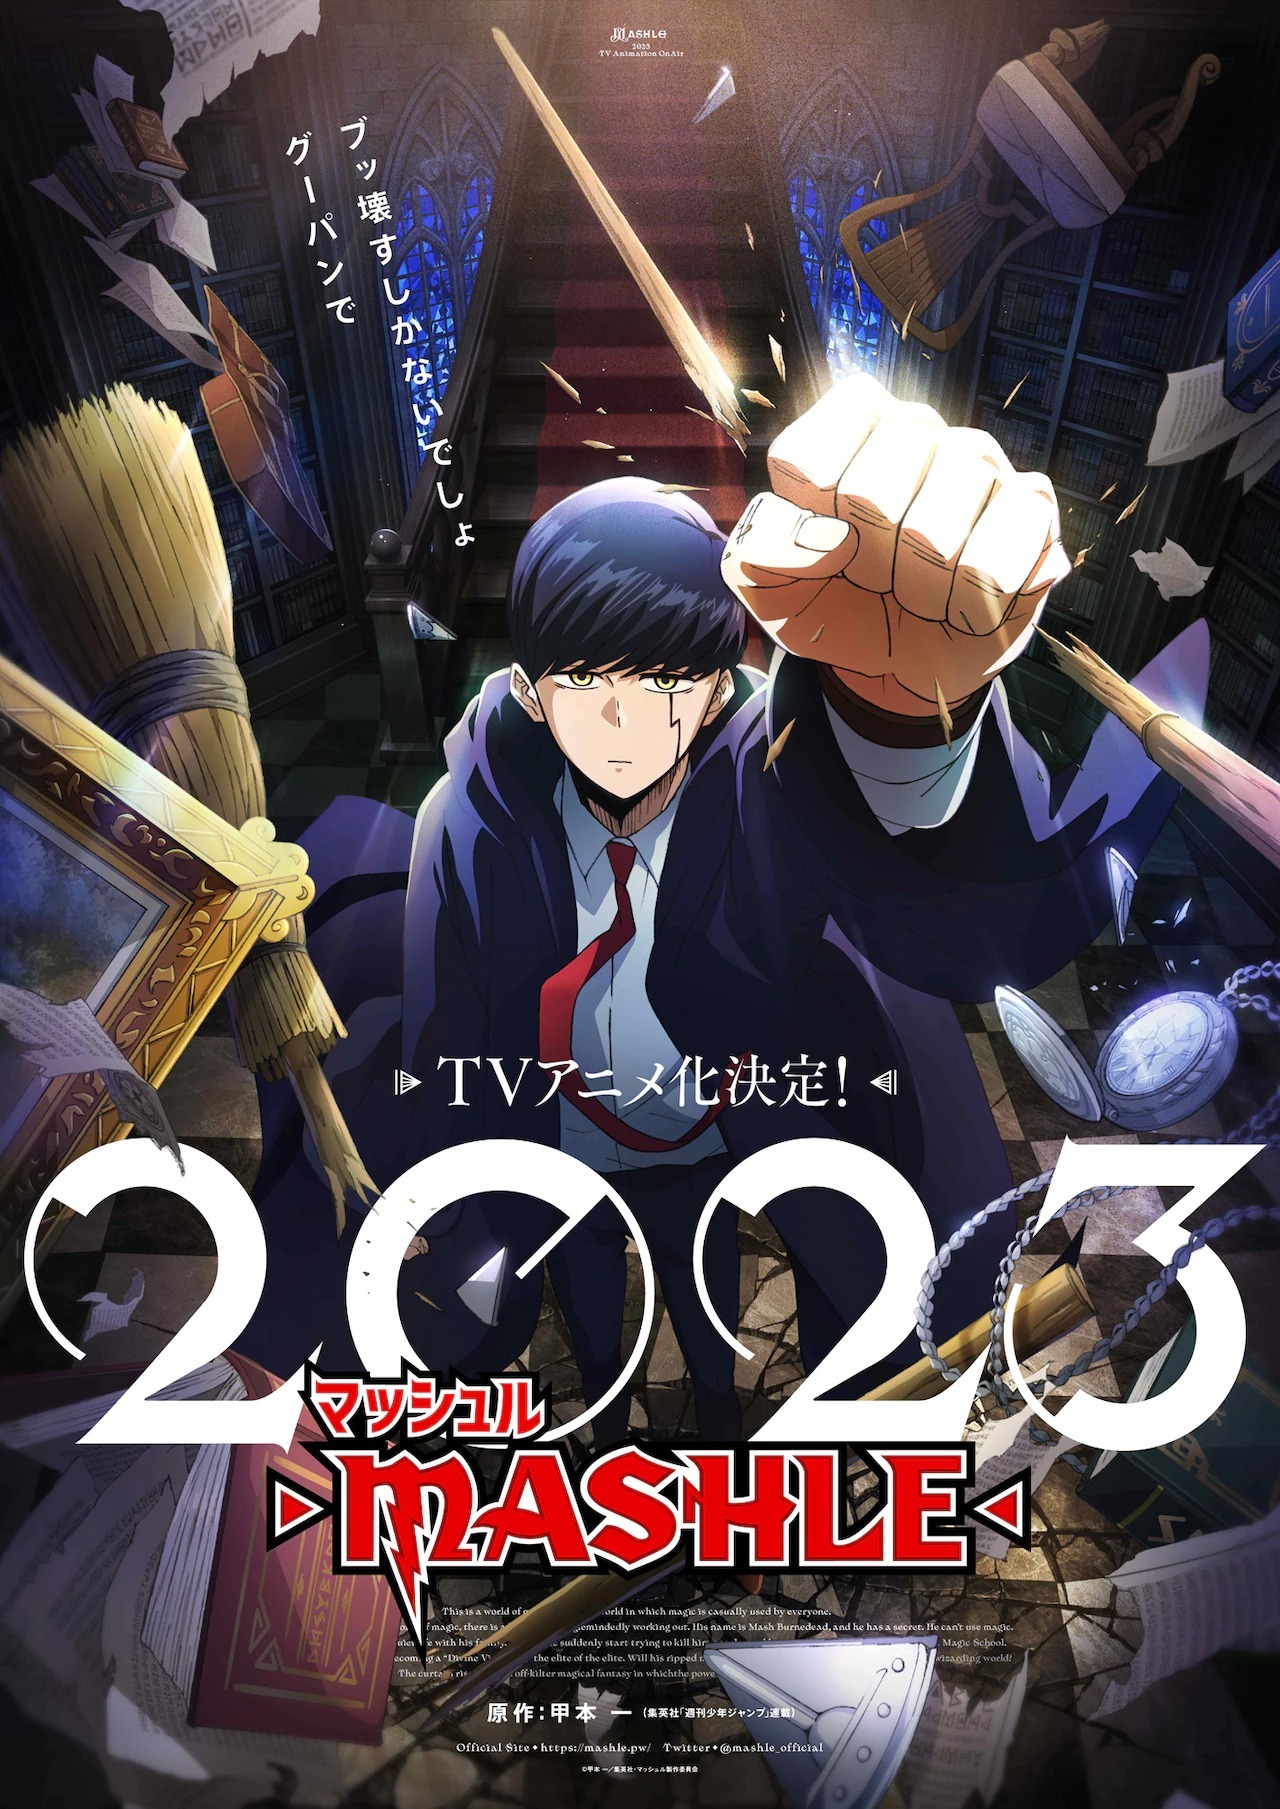 Mashle: Magic and Muscles Anime Season 2 Reveals To Feature Divine